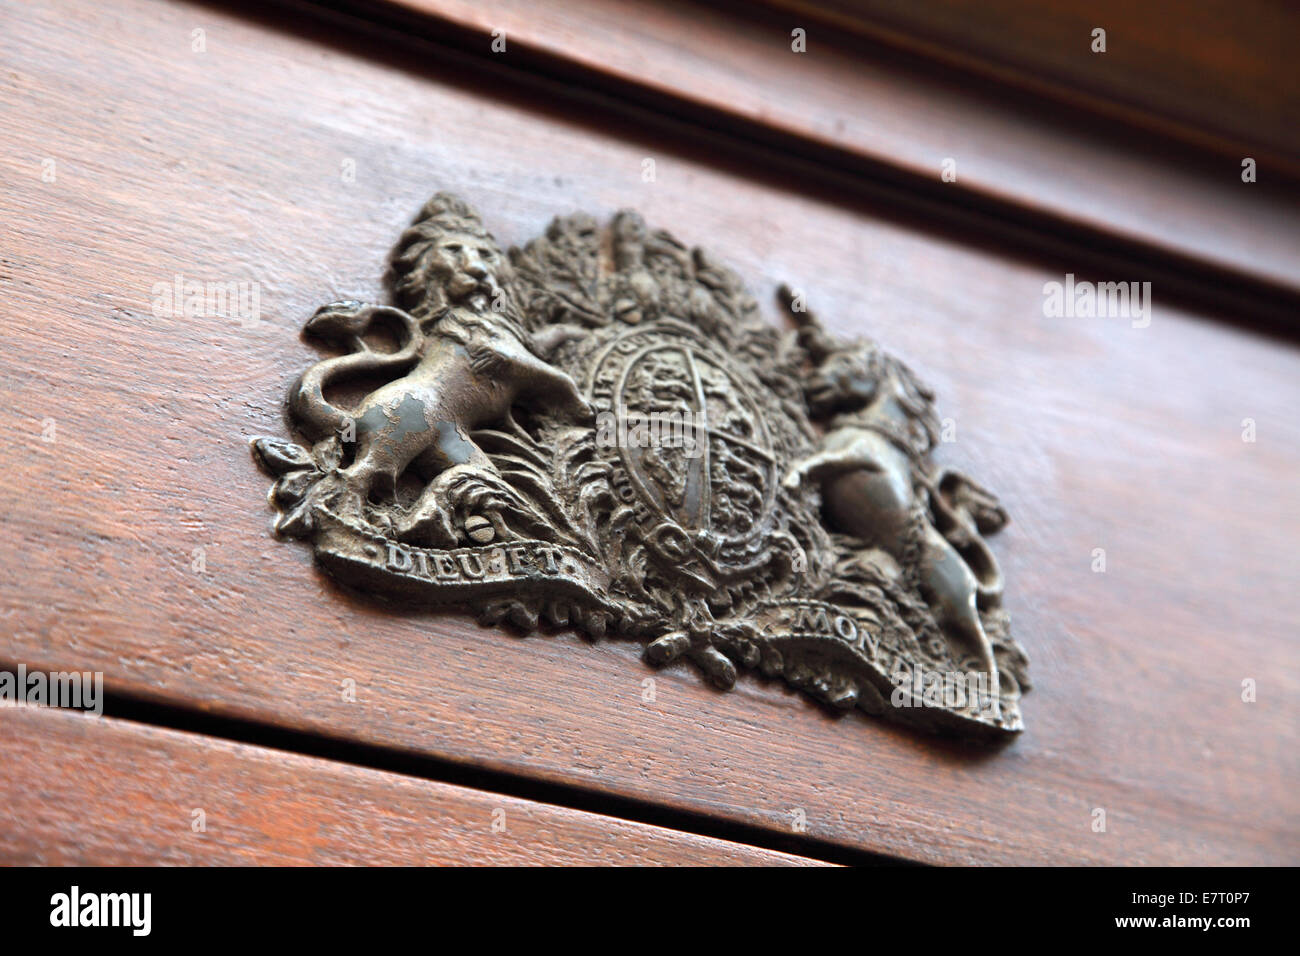 British Government coat of arms on a wooden panel Stock Photo